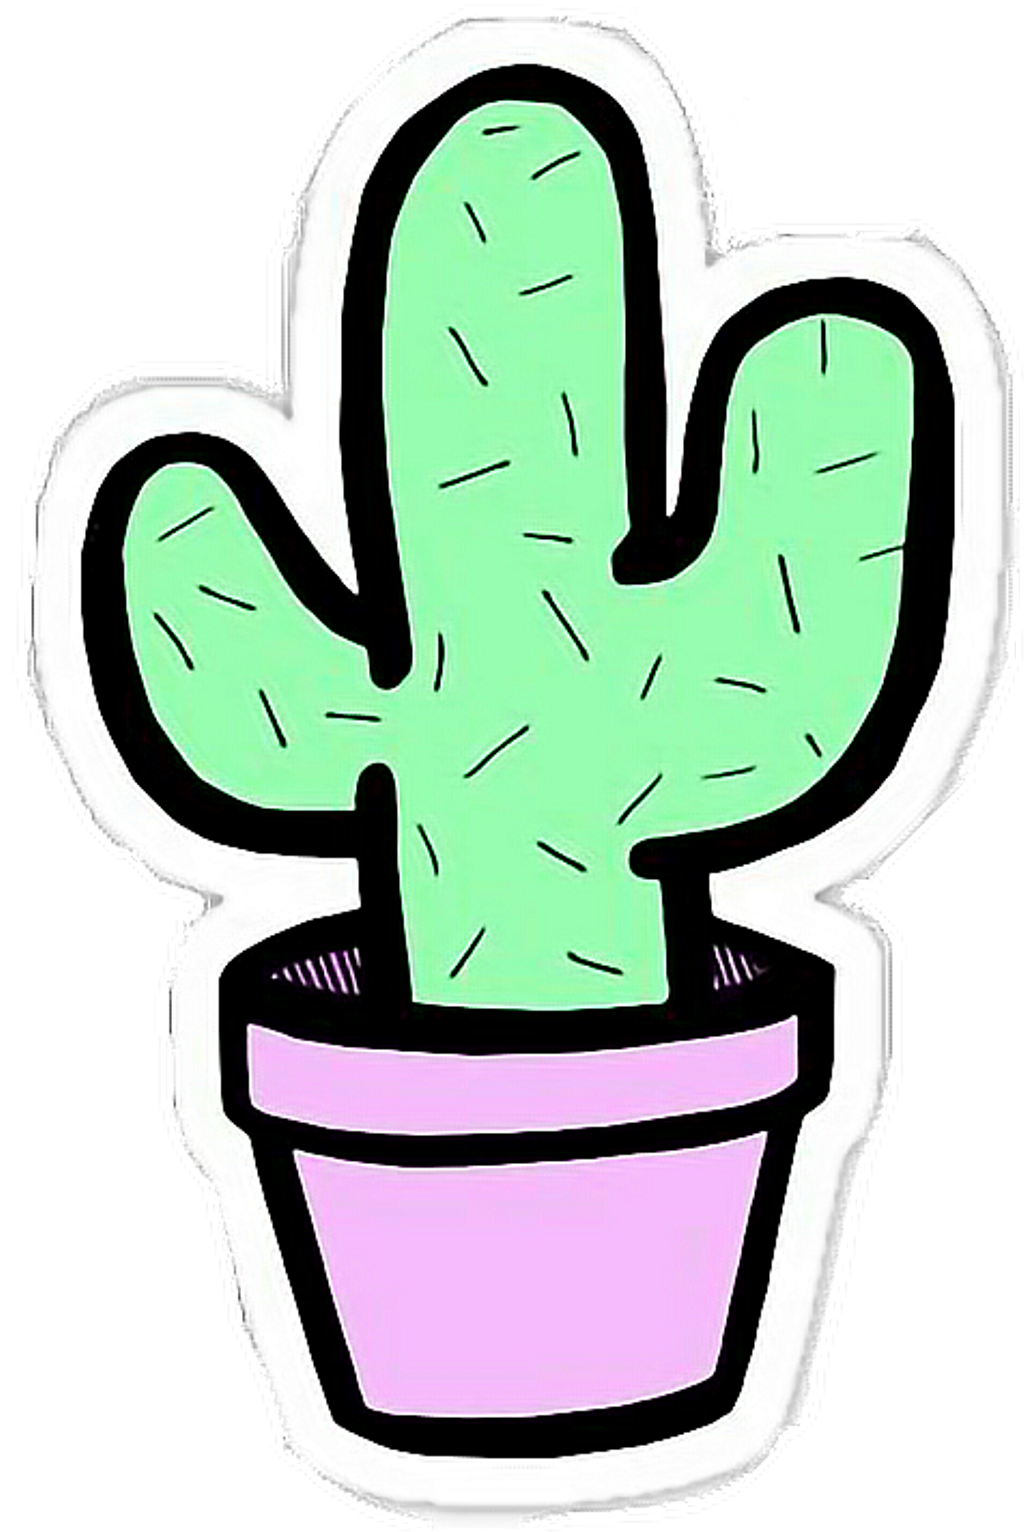 #sticker @picsart #cactus #flower #stikers @isagonzl469 - Cute Drawings Of Cactus (1024x1532)